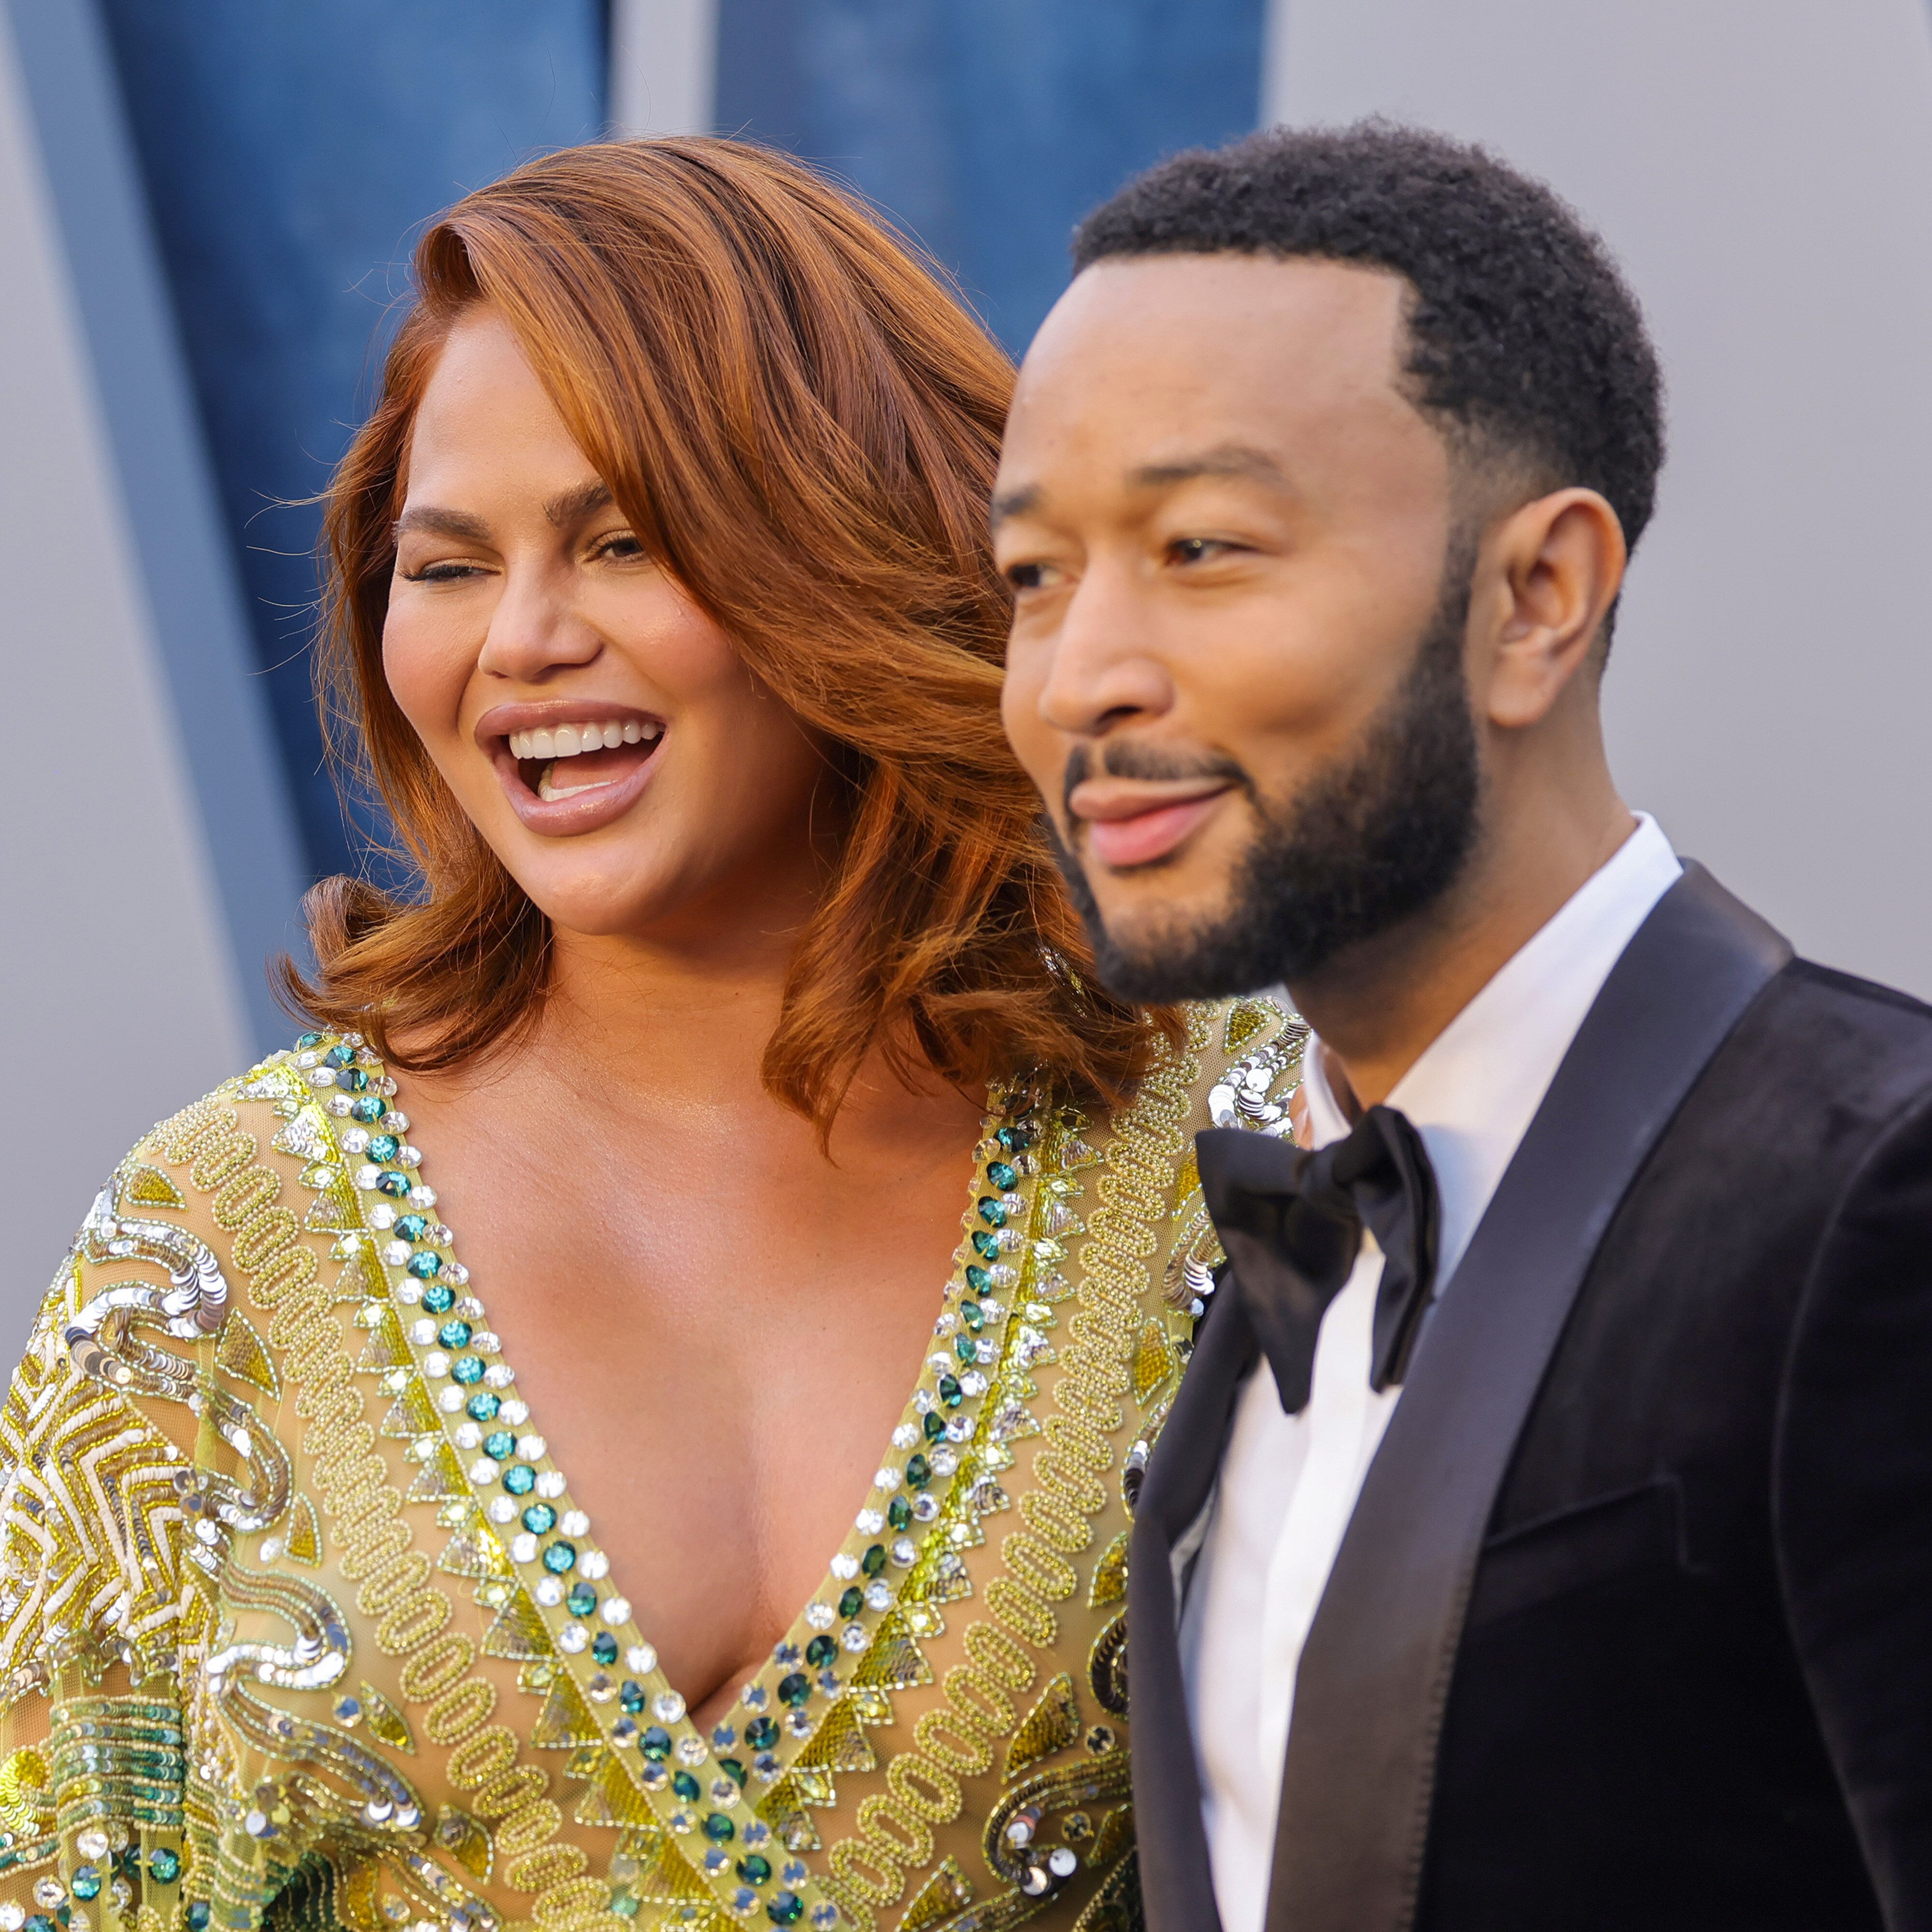 Chrissy Teigen and John Legend attend the 2023 Vanity Fair Oscar Party on March 12, 2023. The couple recently announced their fourth child, a son named Wren Alexander Stephens.